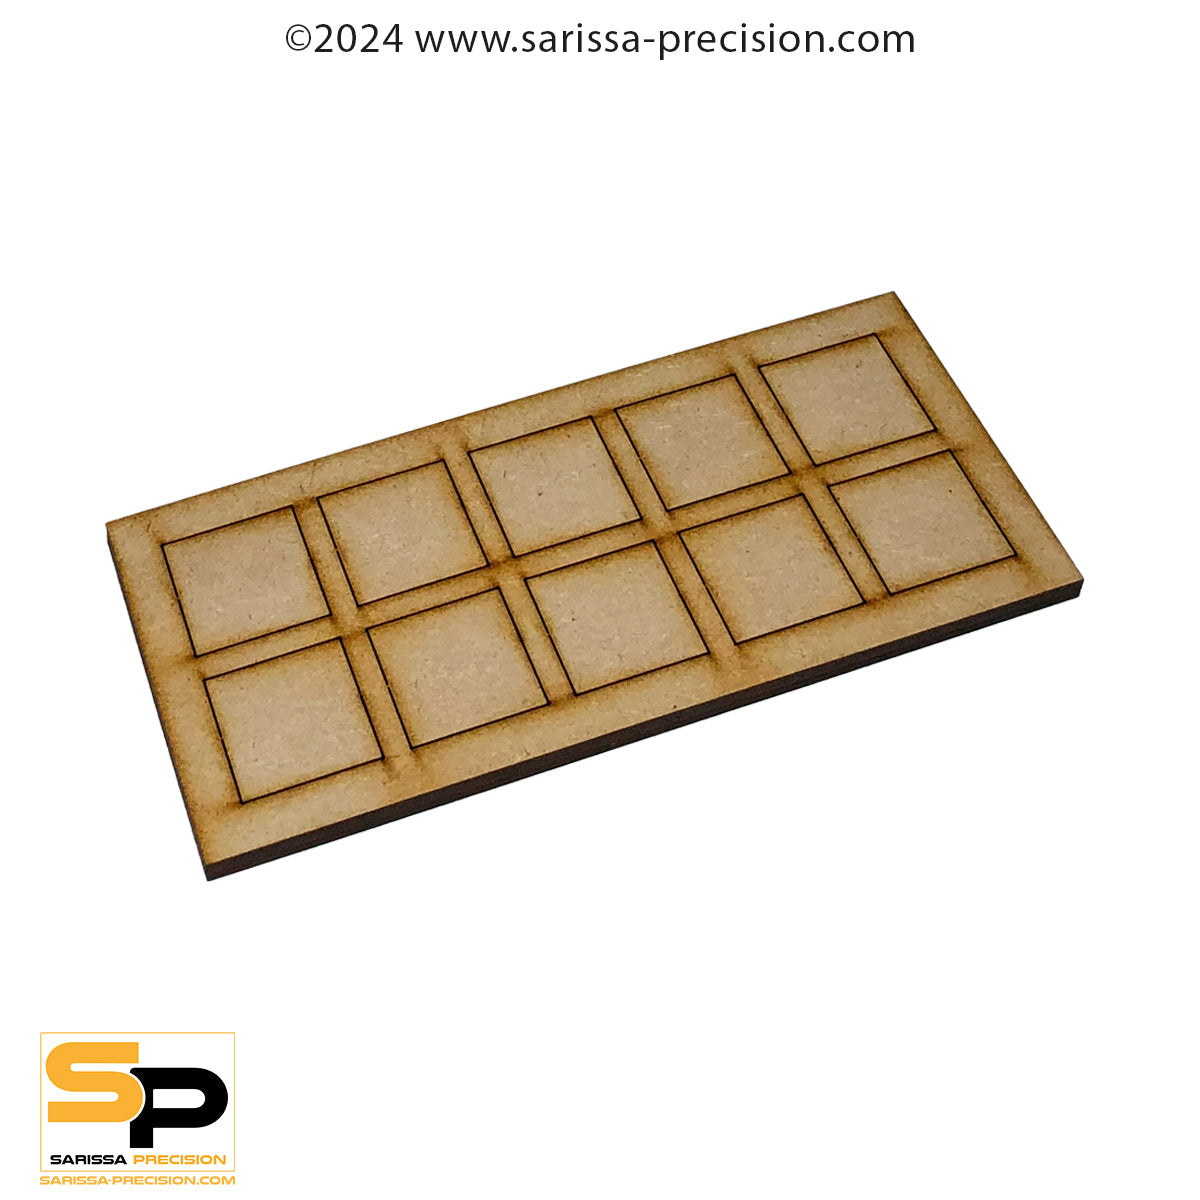 4x3 30x30mm Conversion Tray for 25x25mm bases